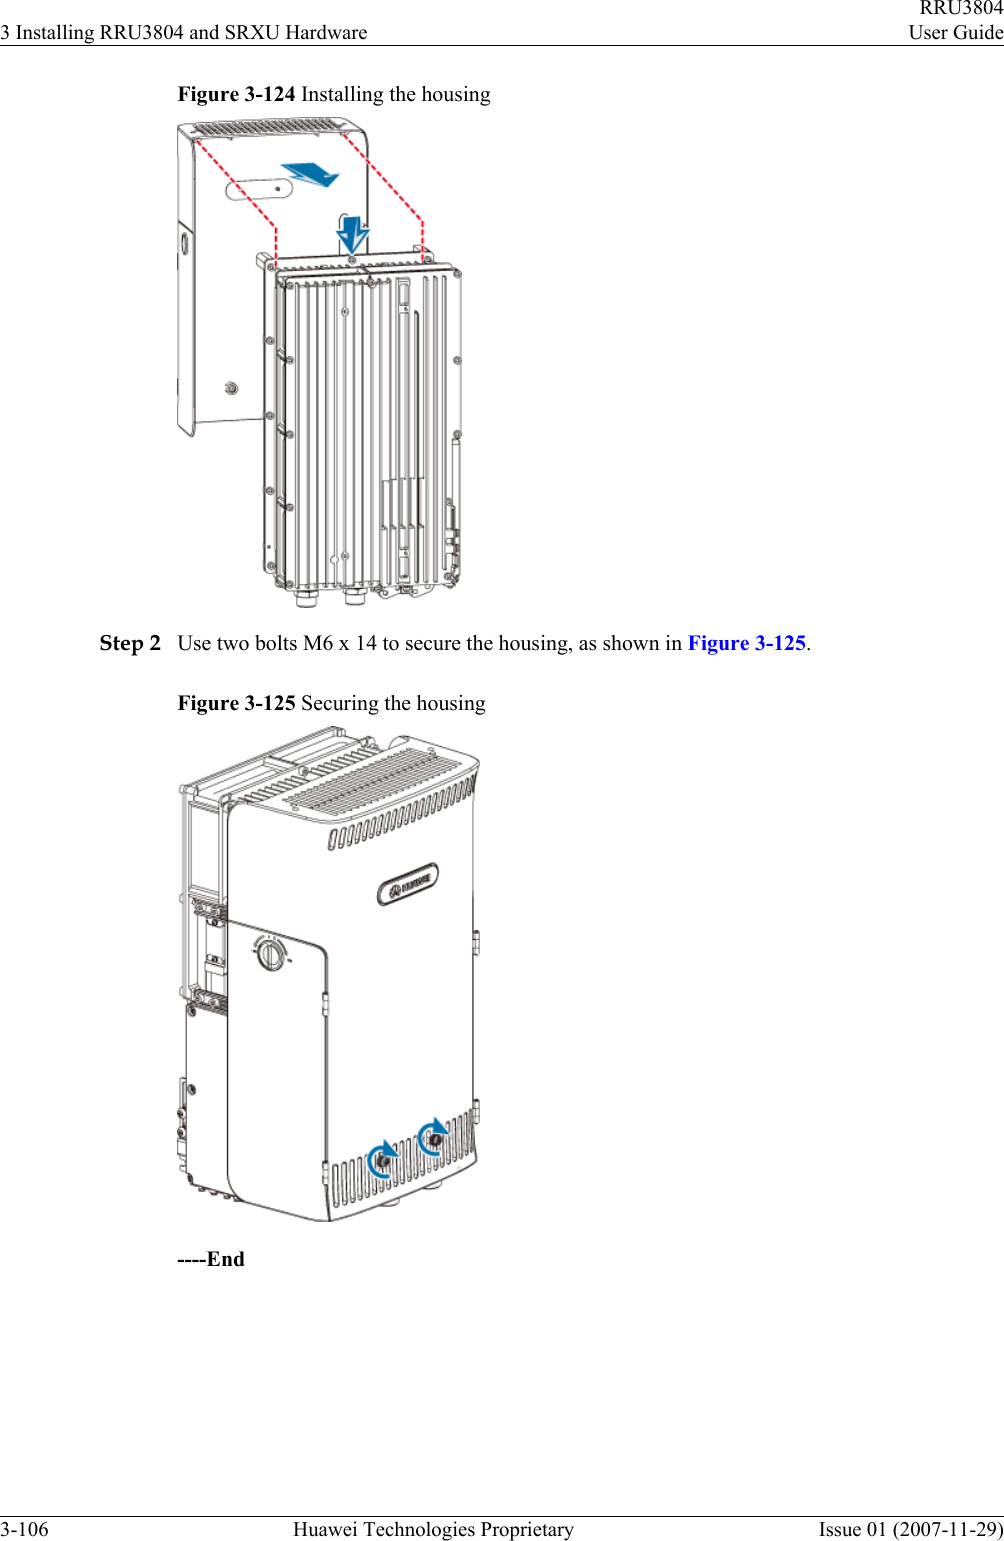 Figure 3-124 Installing the housingStep 2 Use two bolts M6 x 14 to secure the housing, as shown in Figure 3-125.Figure 3-125 Securing the housing----End3 Installing RRU3804 and SRXU HardwareRRU3804User Guide3-106 Huawei Technologies Proprietary Issue 01 (2007-11-29)